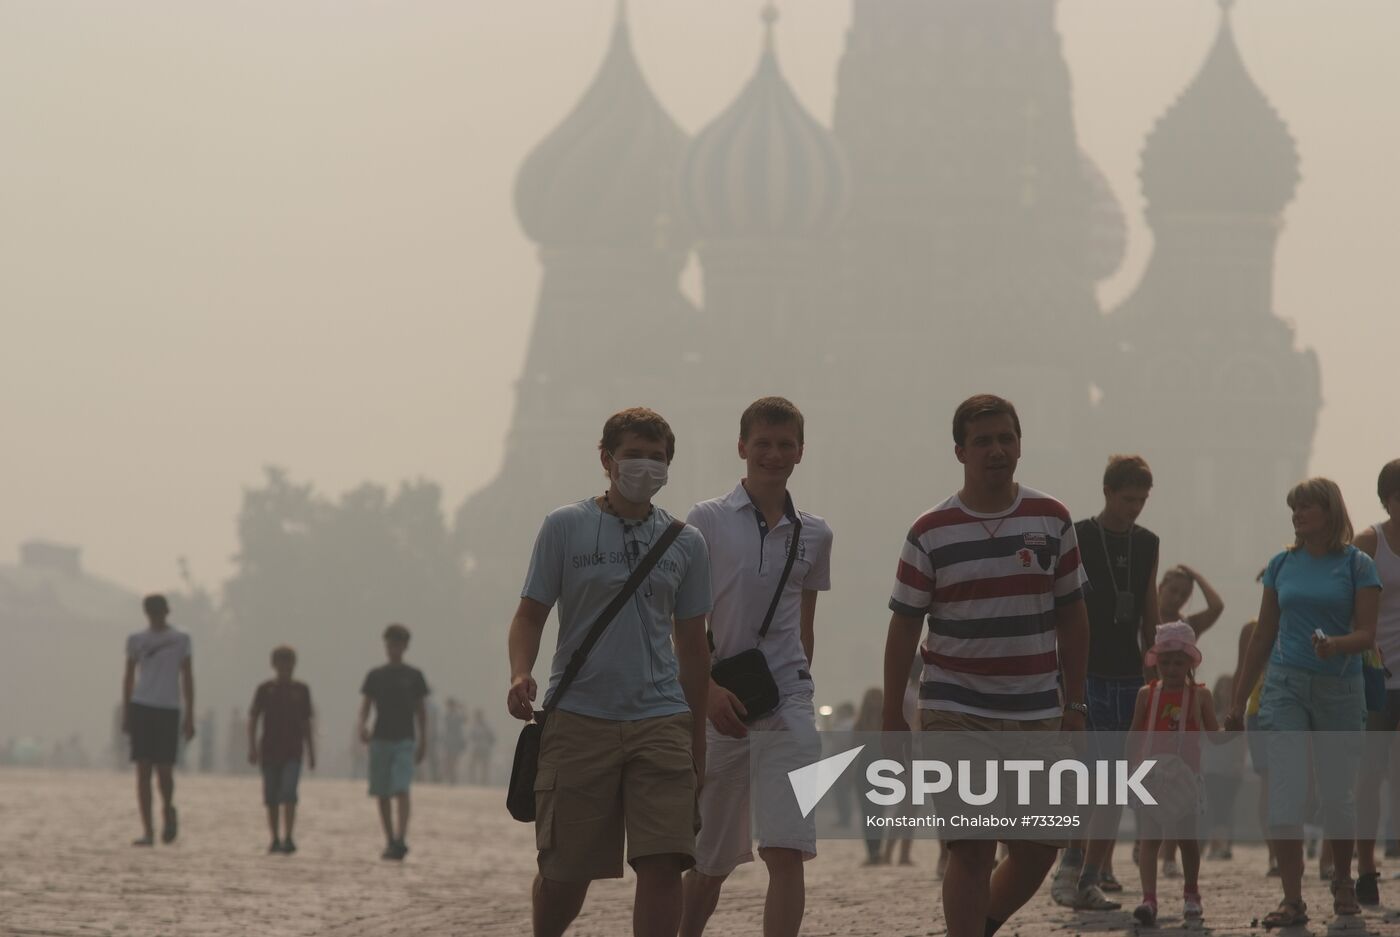 Smoke from peat fires blanketed Moscow